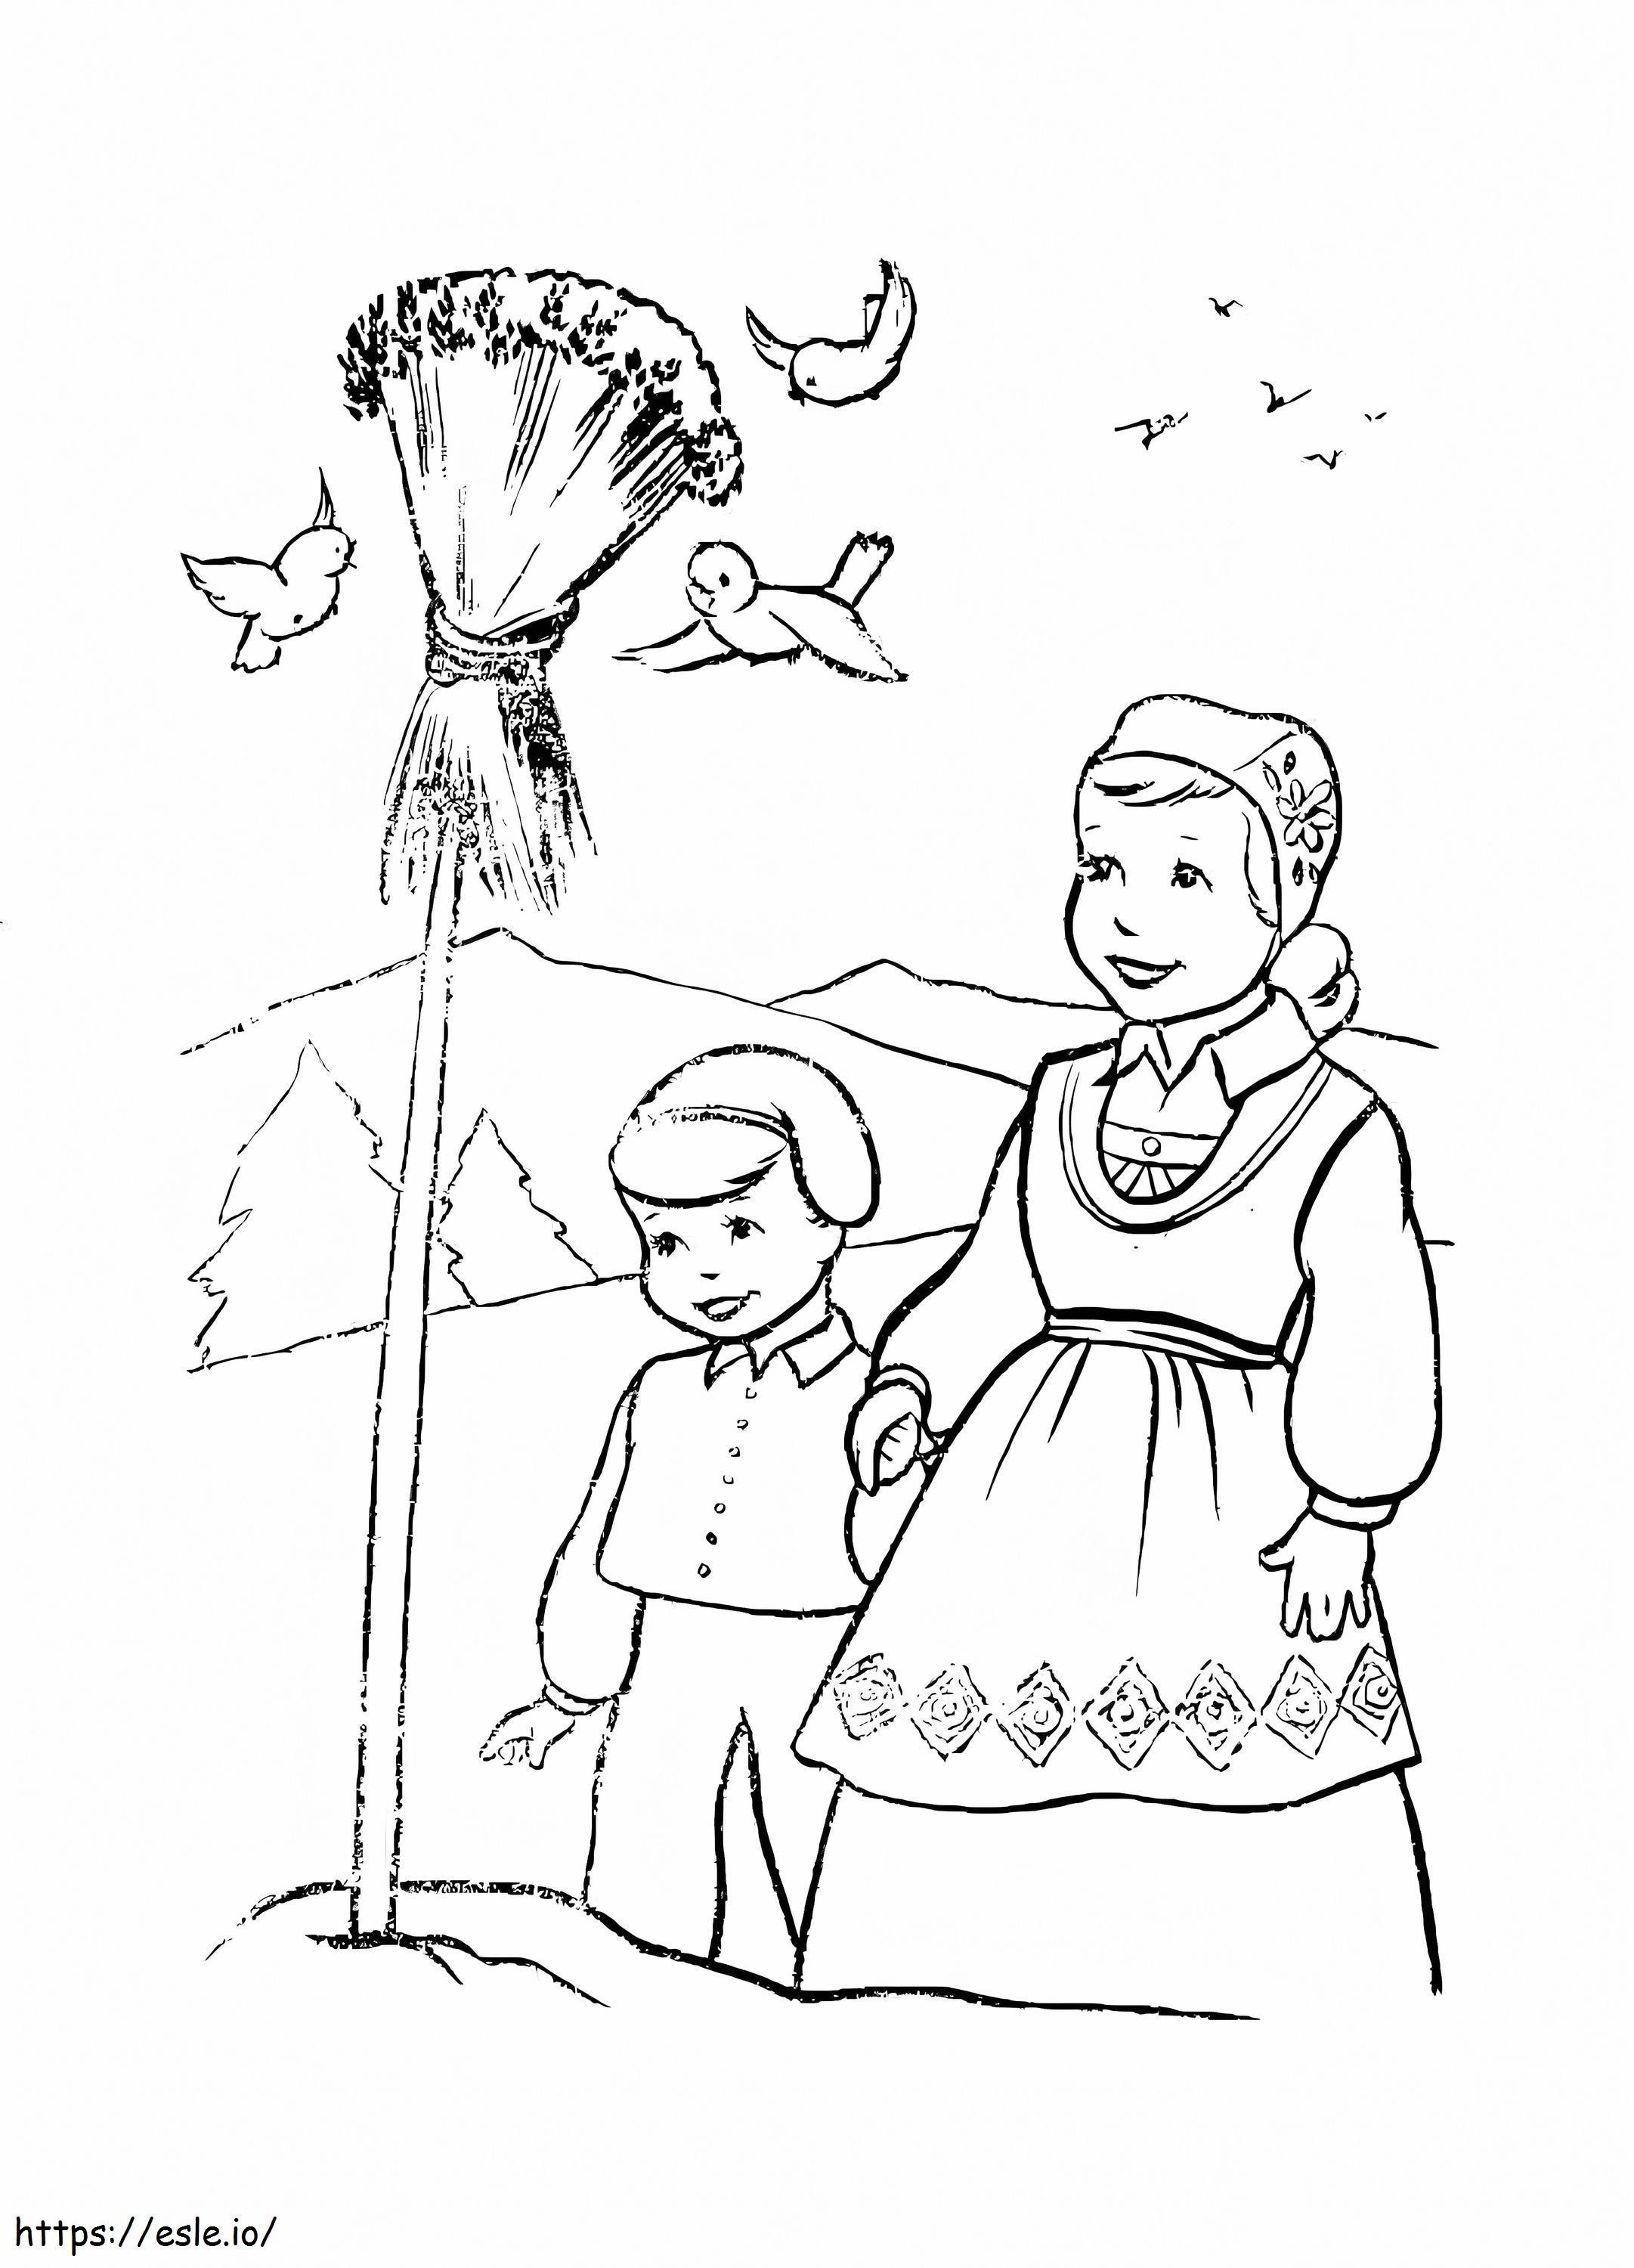 Christmas In Norway coloring page